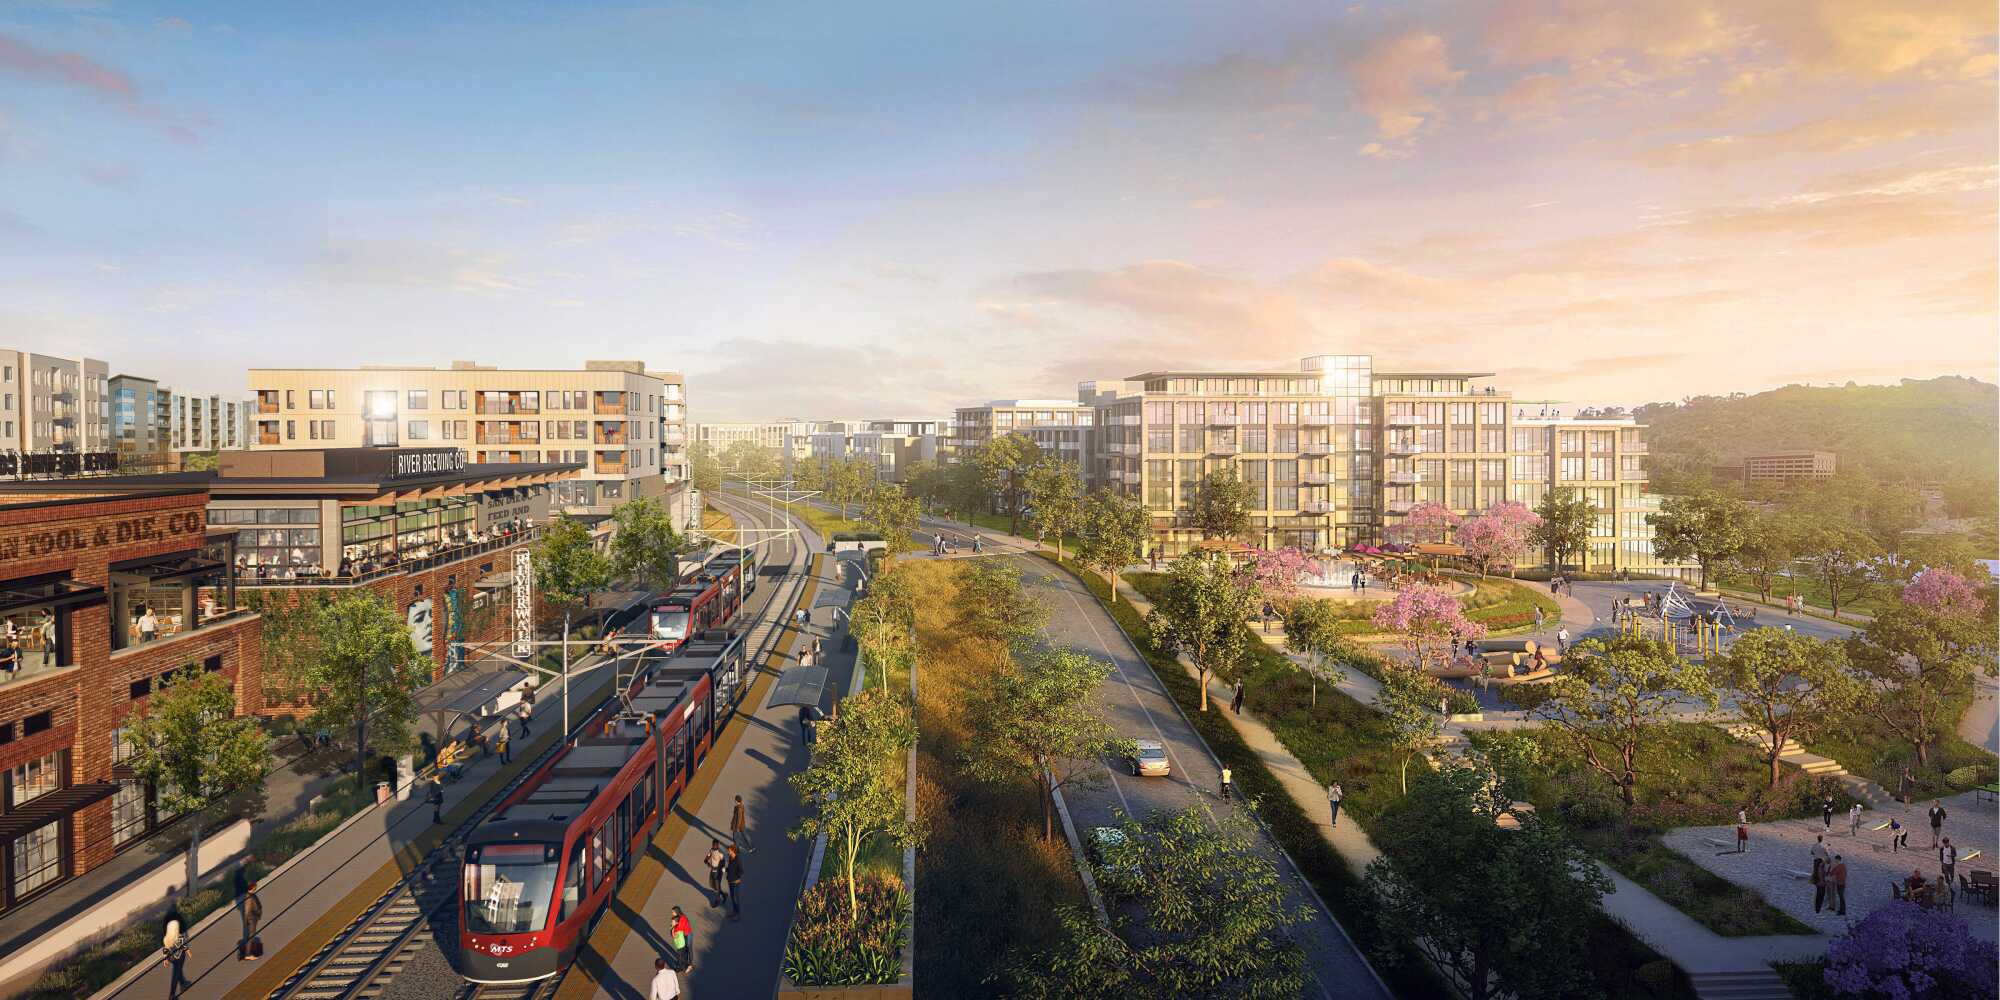 A rendering of the central portion of the Riverwalk project, which is bisected by the trolley line.